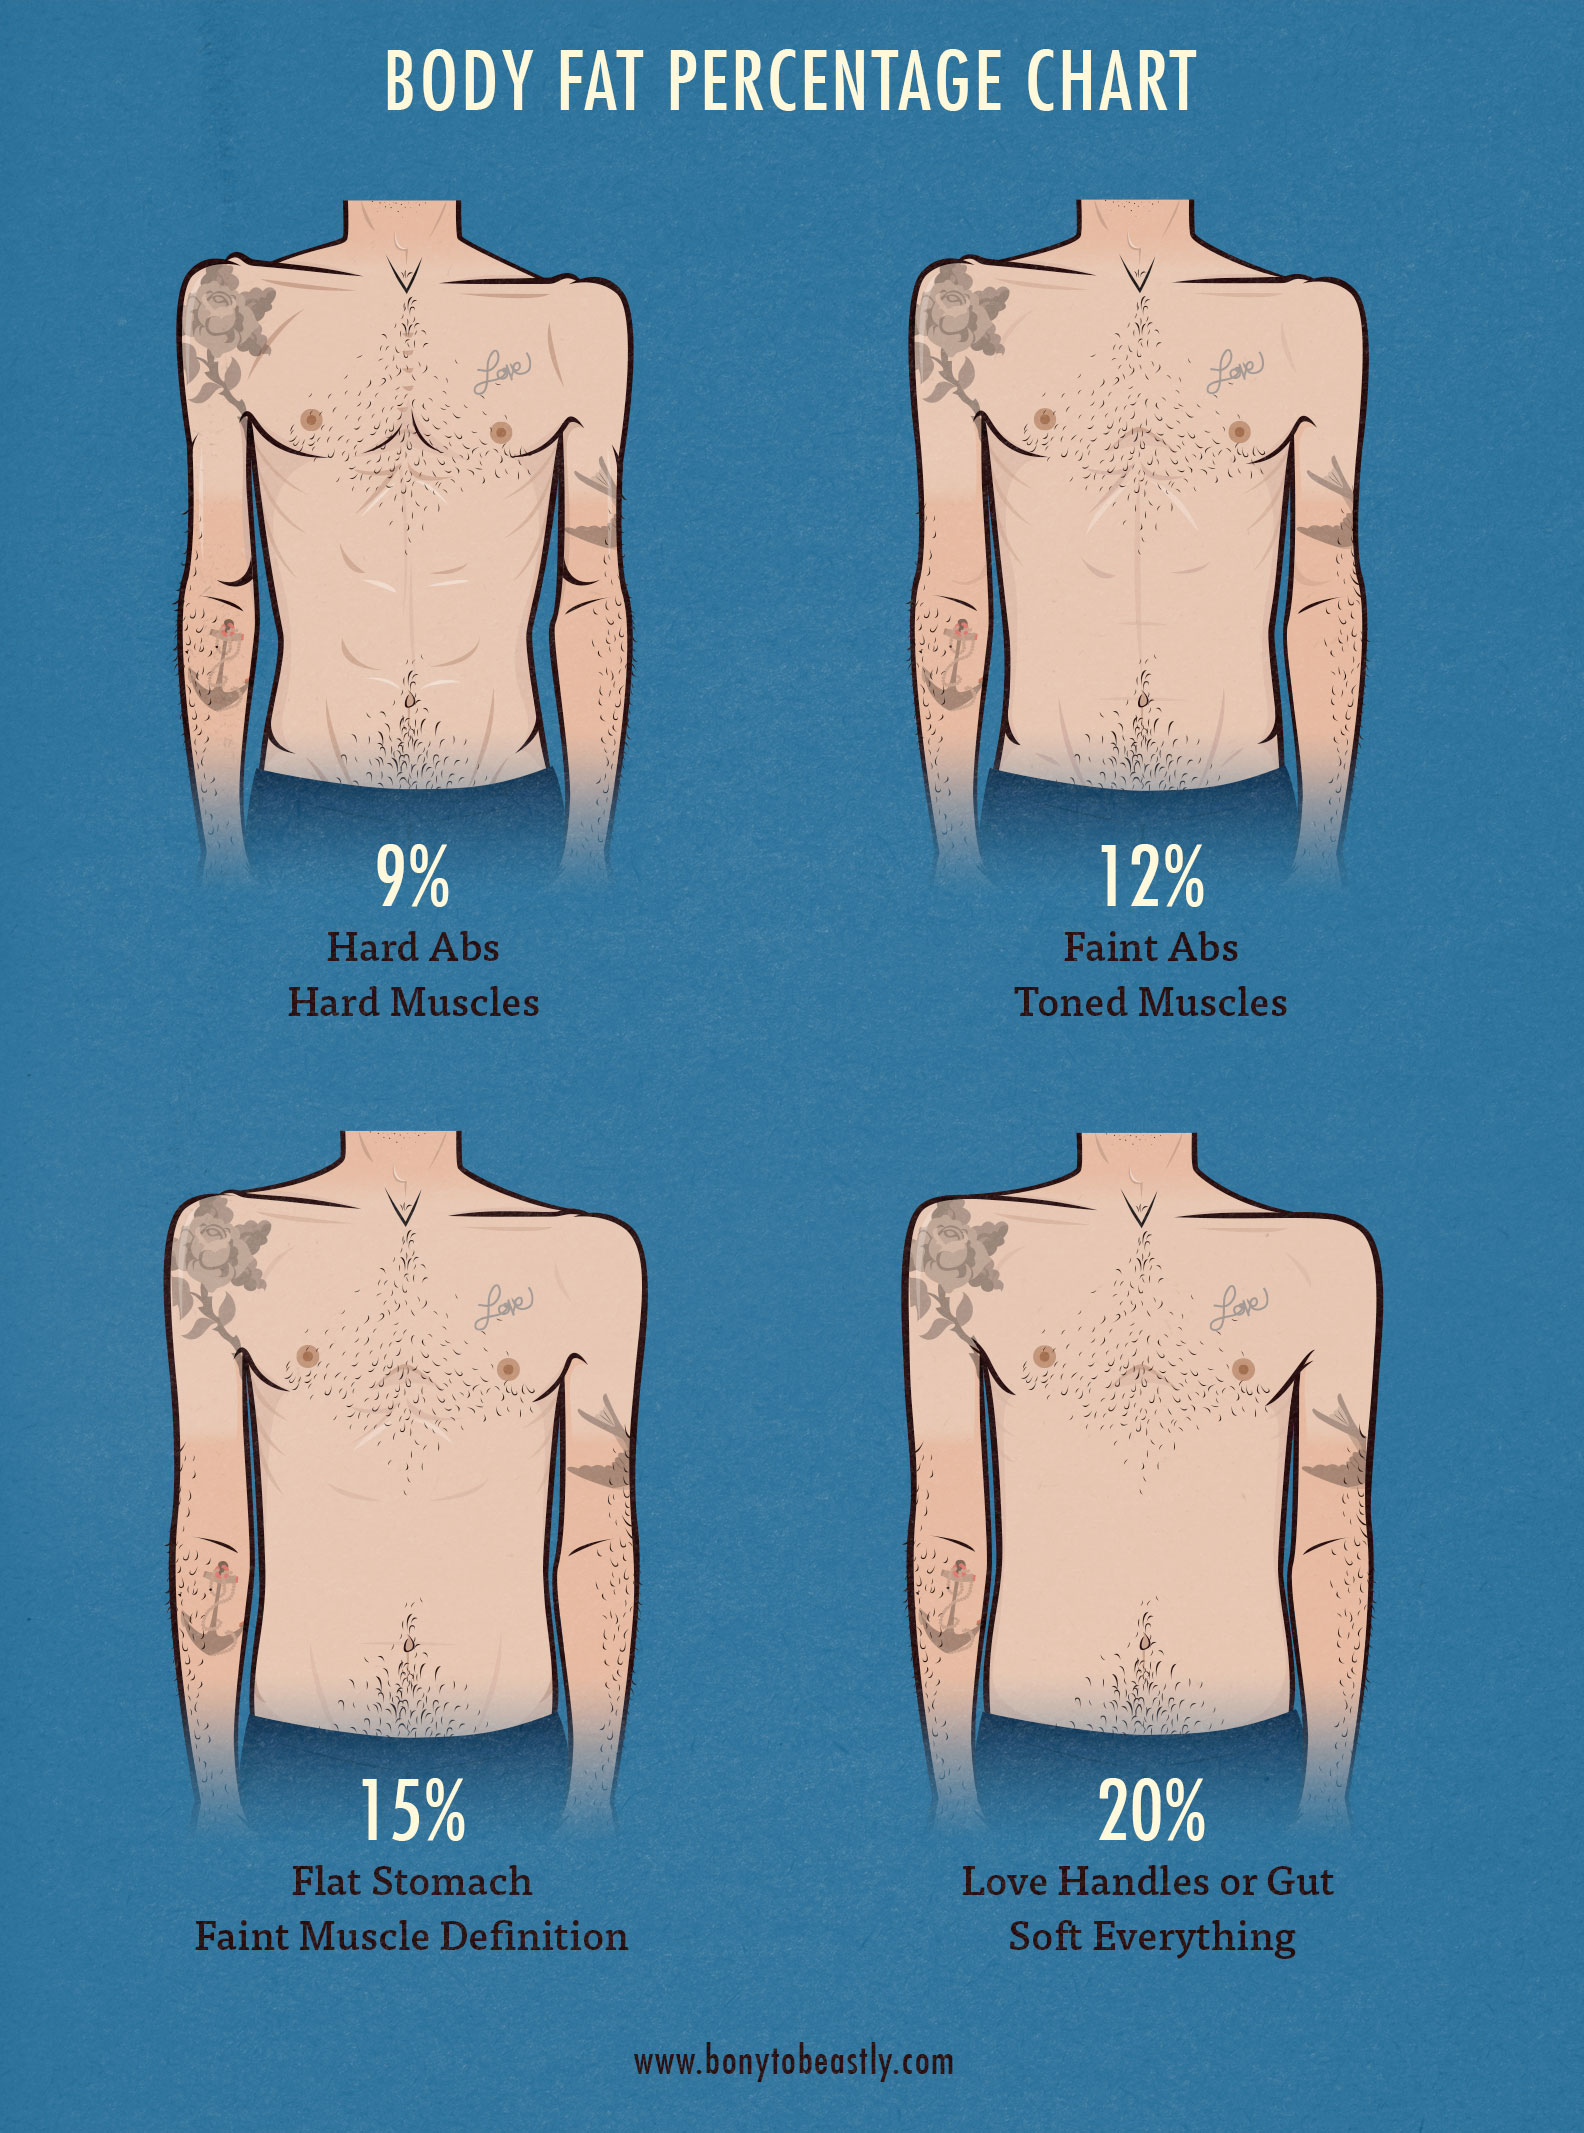 body-fat-percentage-chart-pictures-illustration-bony-to-beastly-1.jpg